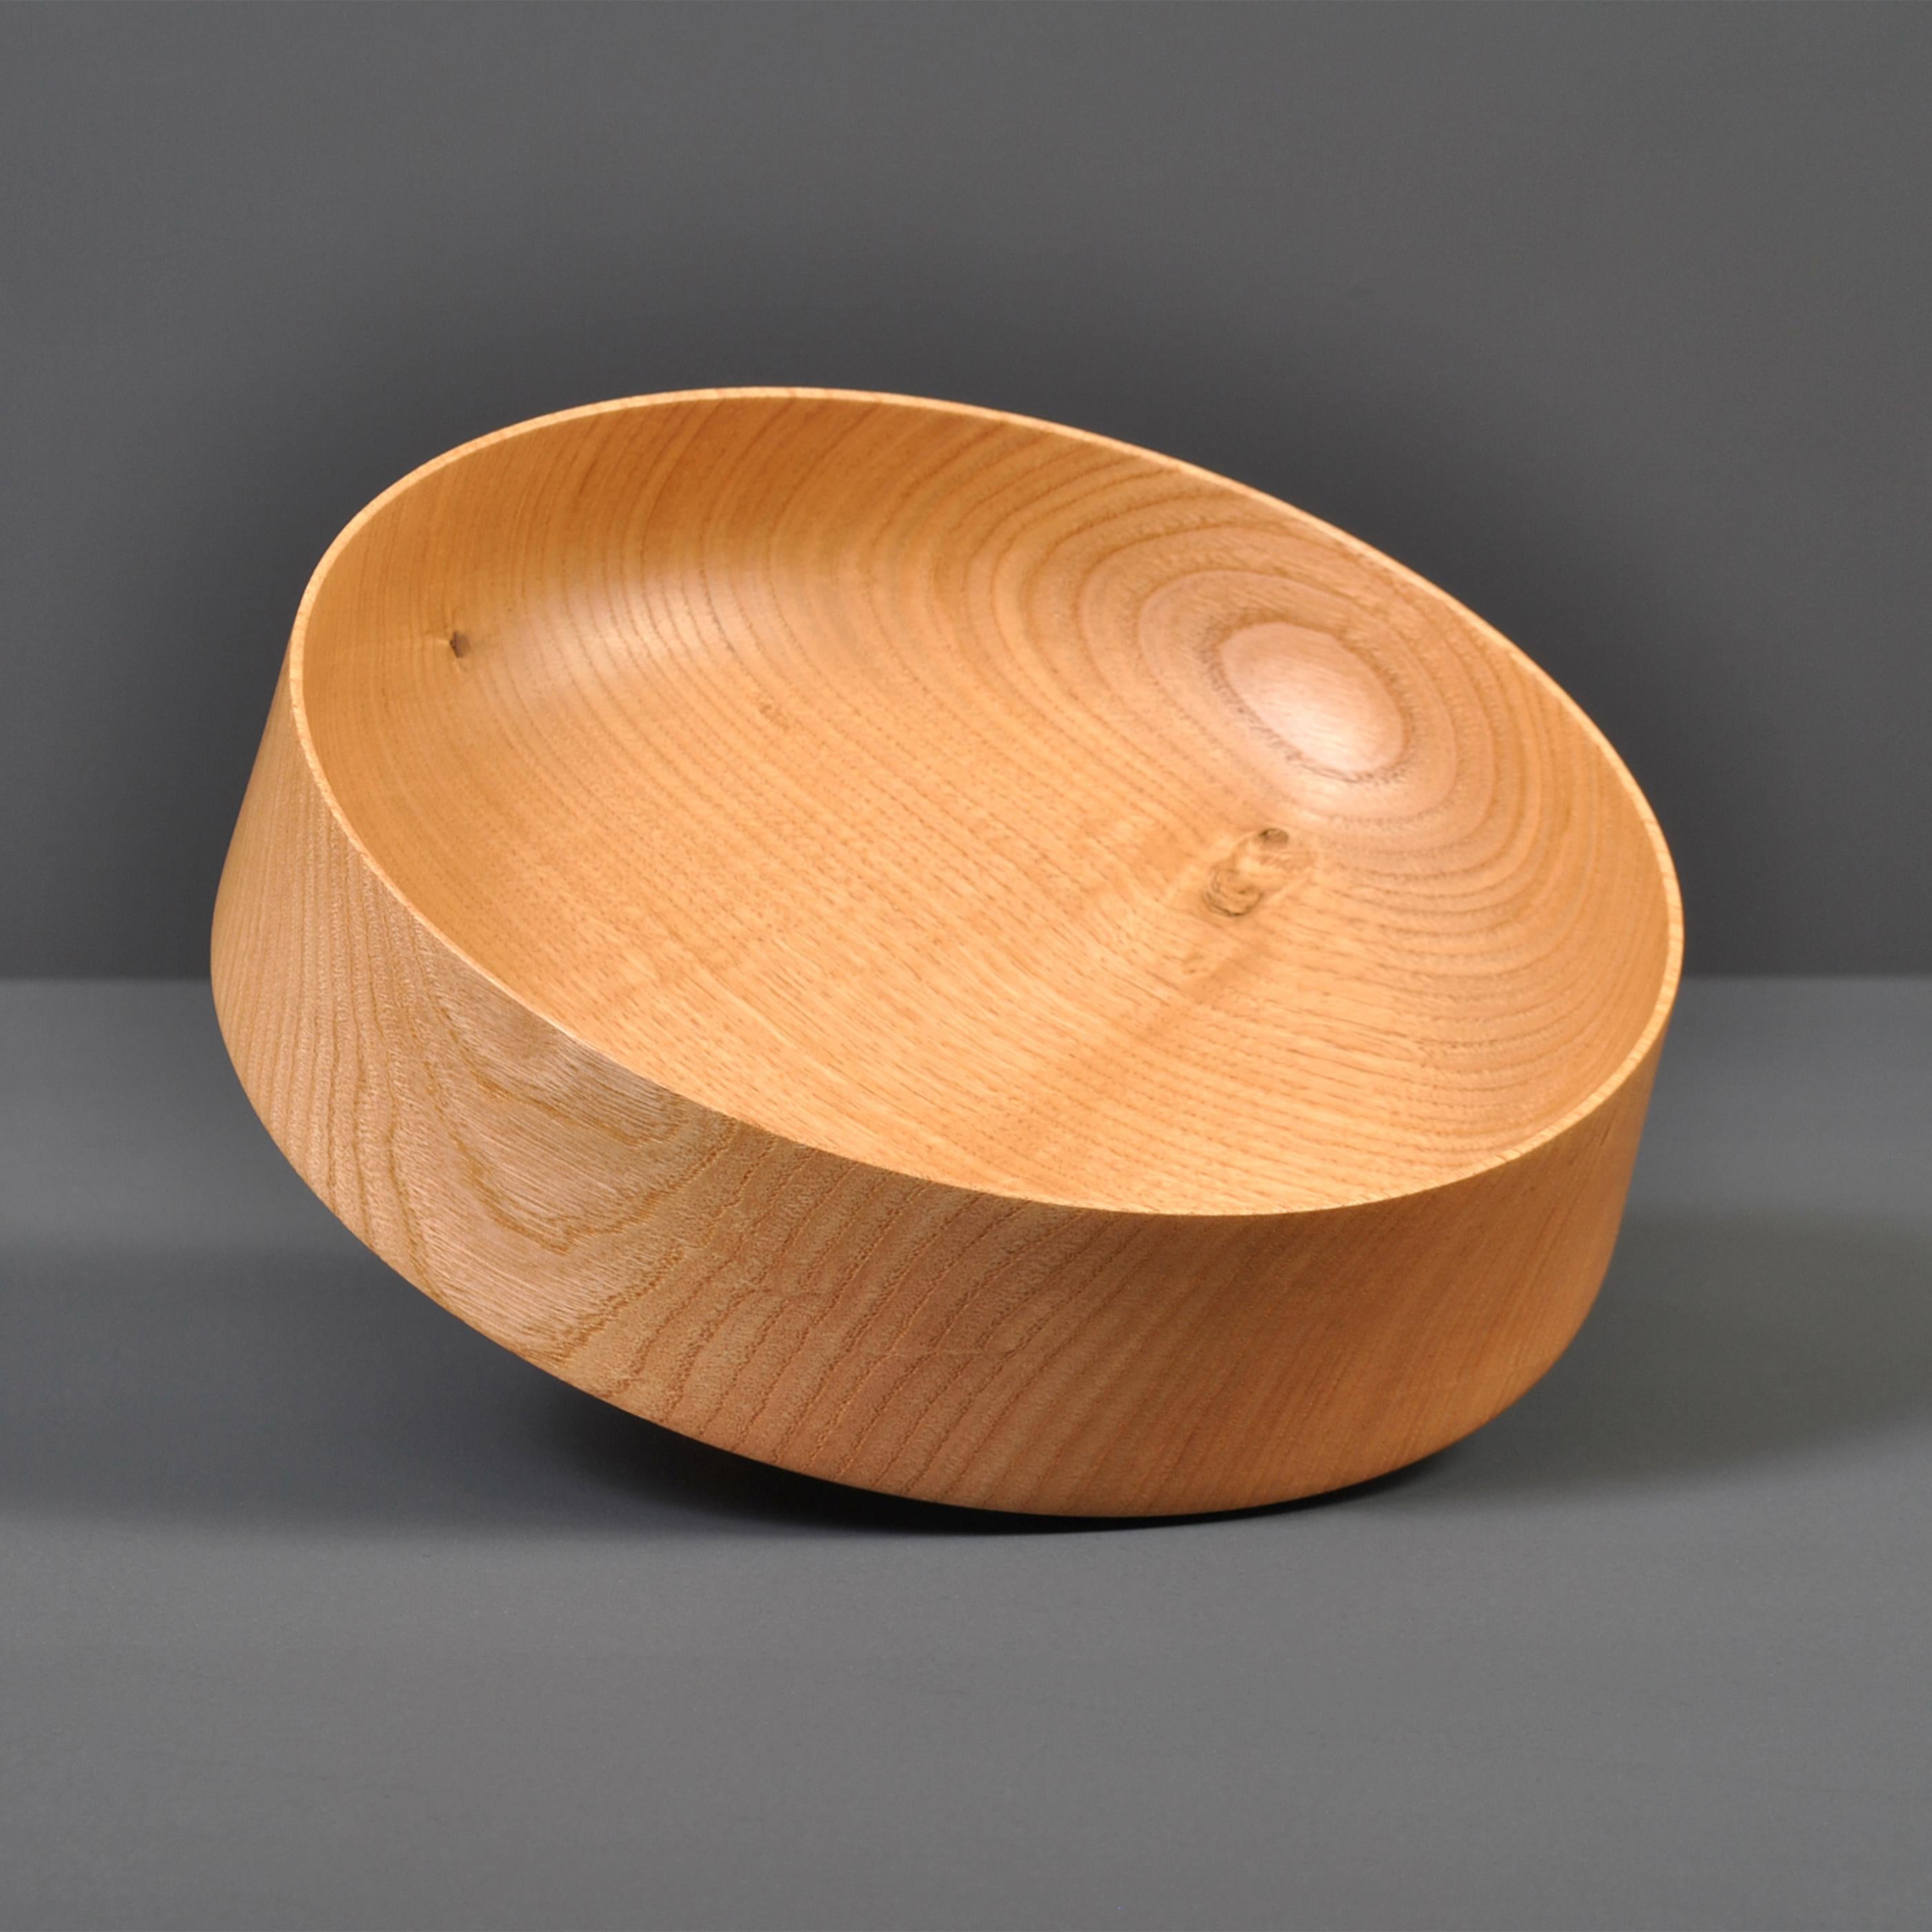 Hand-Crafted Handcrafted Turned Chestnut Bowl For Sale